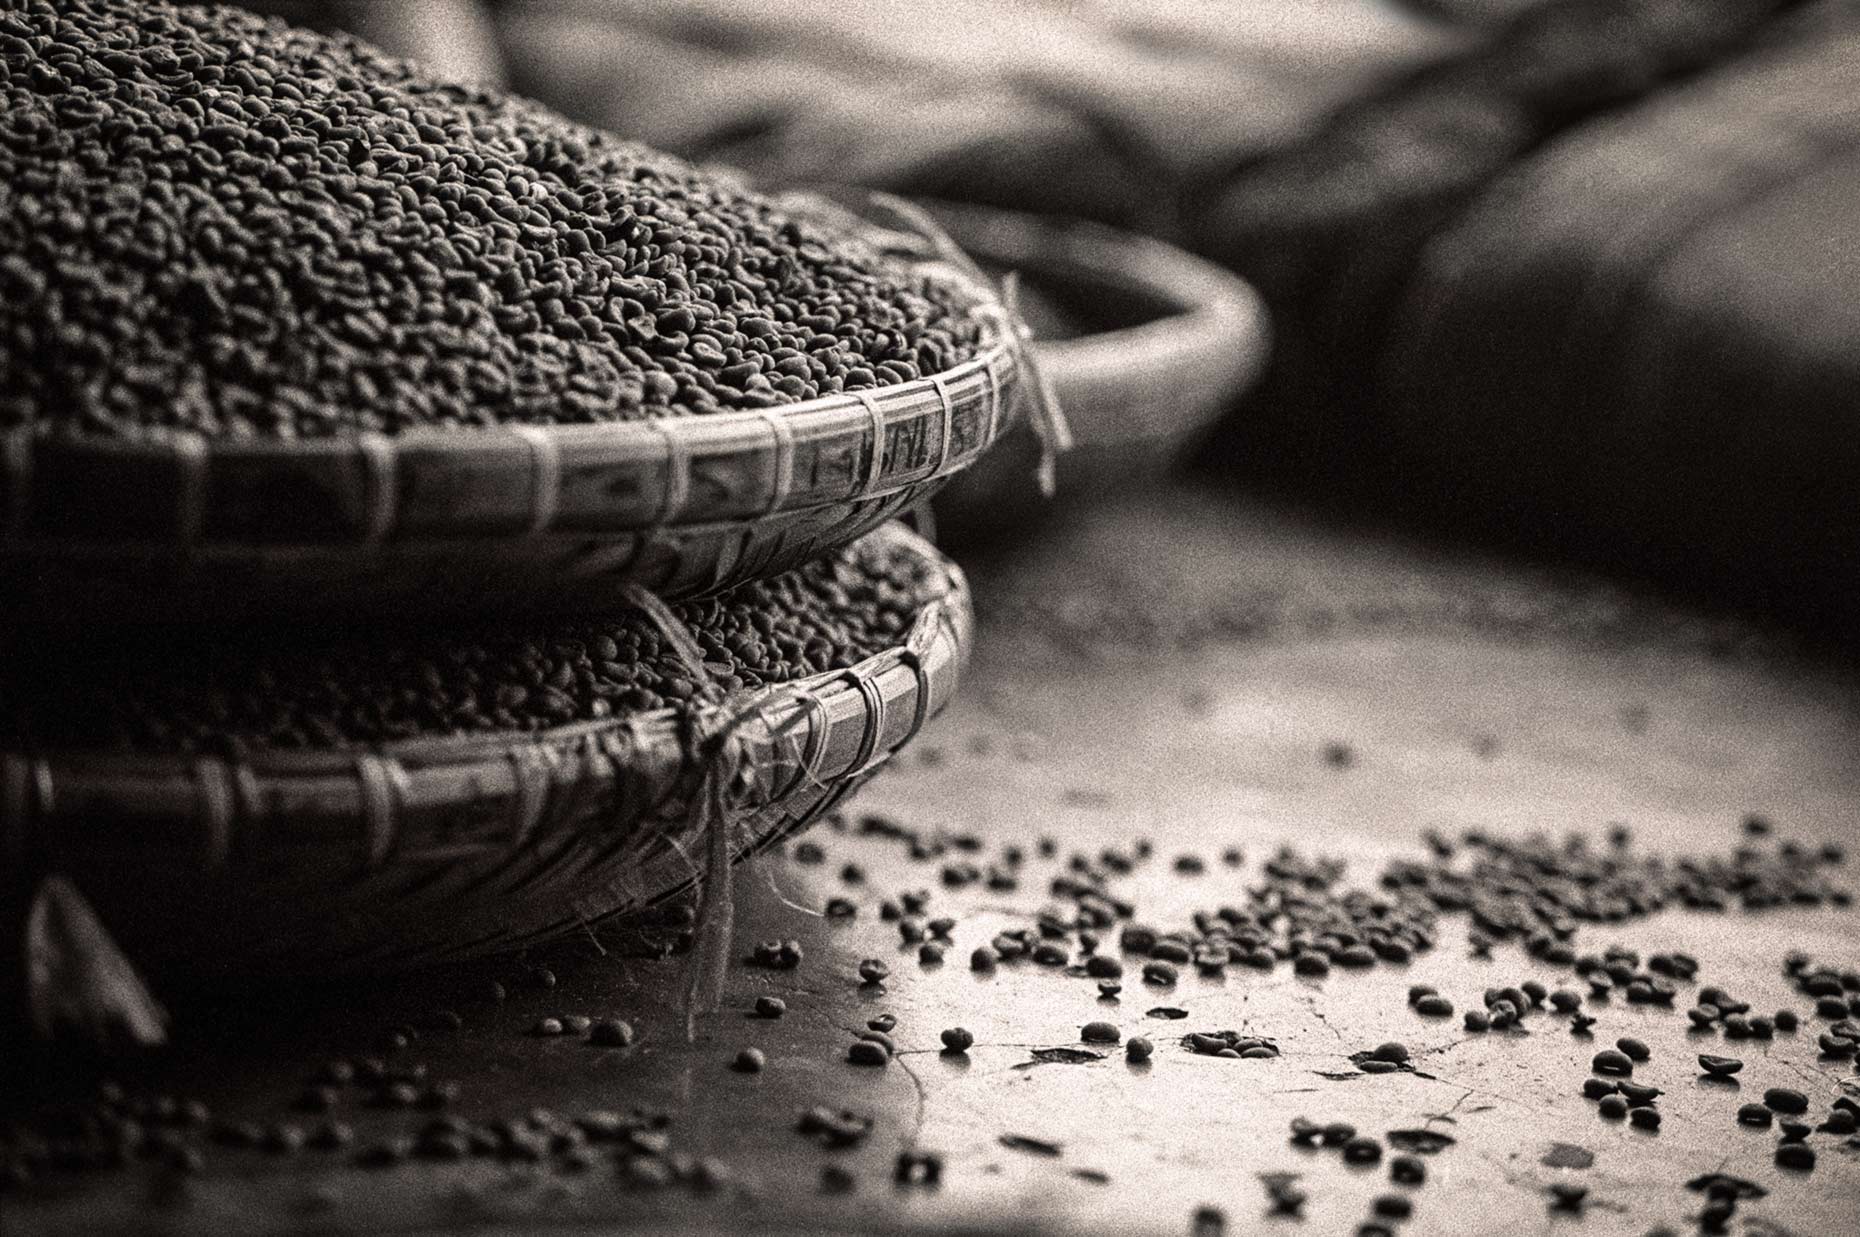 Sumatran dried coffee beans in sorting baskets. Agriculture photography